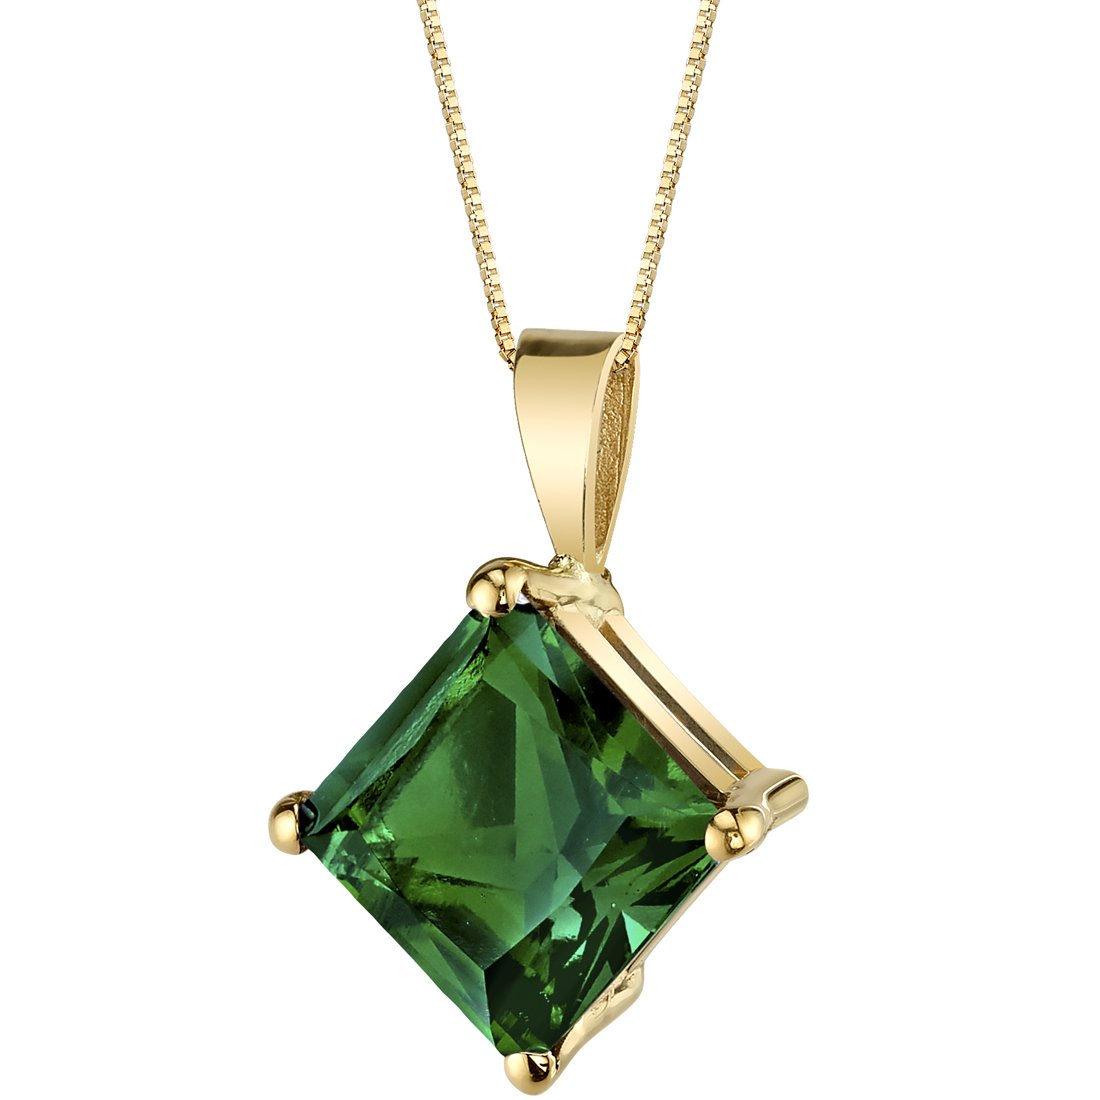 Peora Created Emerald Pendant for Women 14K Yellow Gold, Classic Solitaire, 2.25 Carats Princess Cut, 8mm